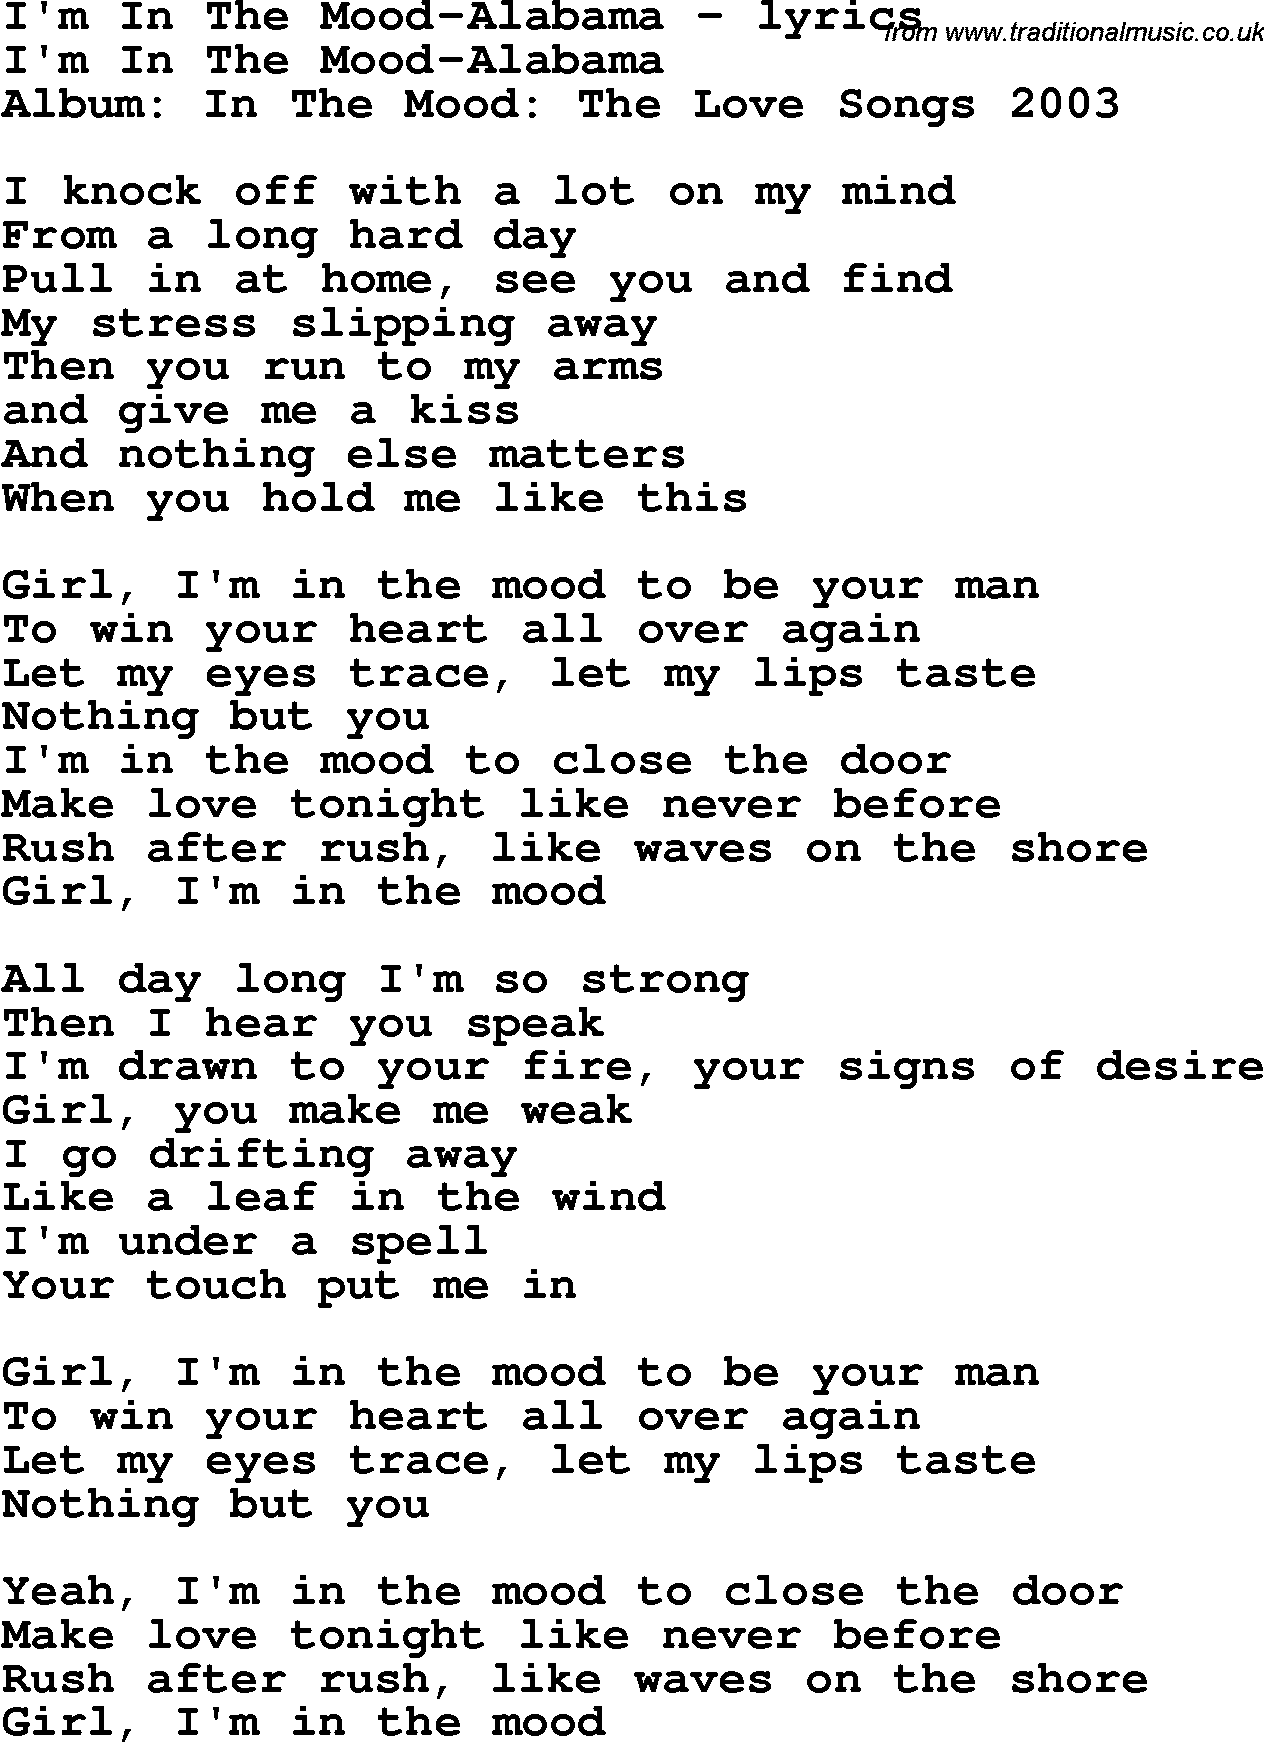 Love Song Lyrics for: I'm In The Mood-Alabama